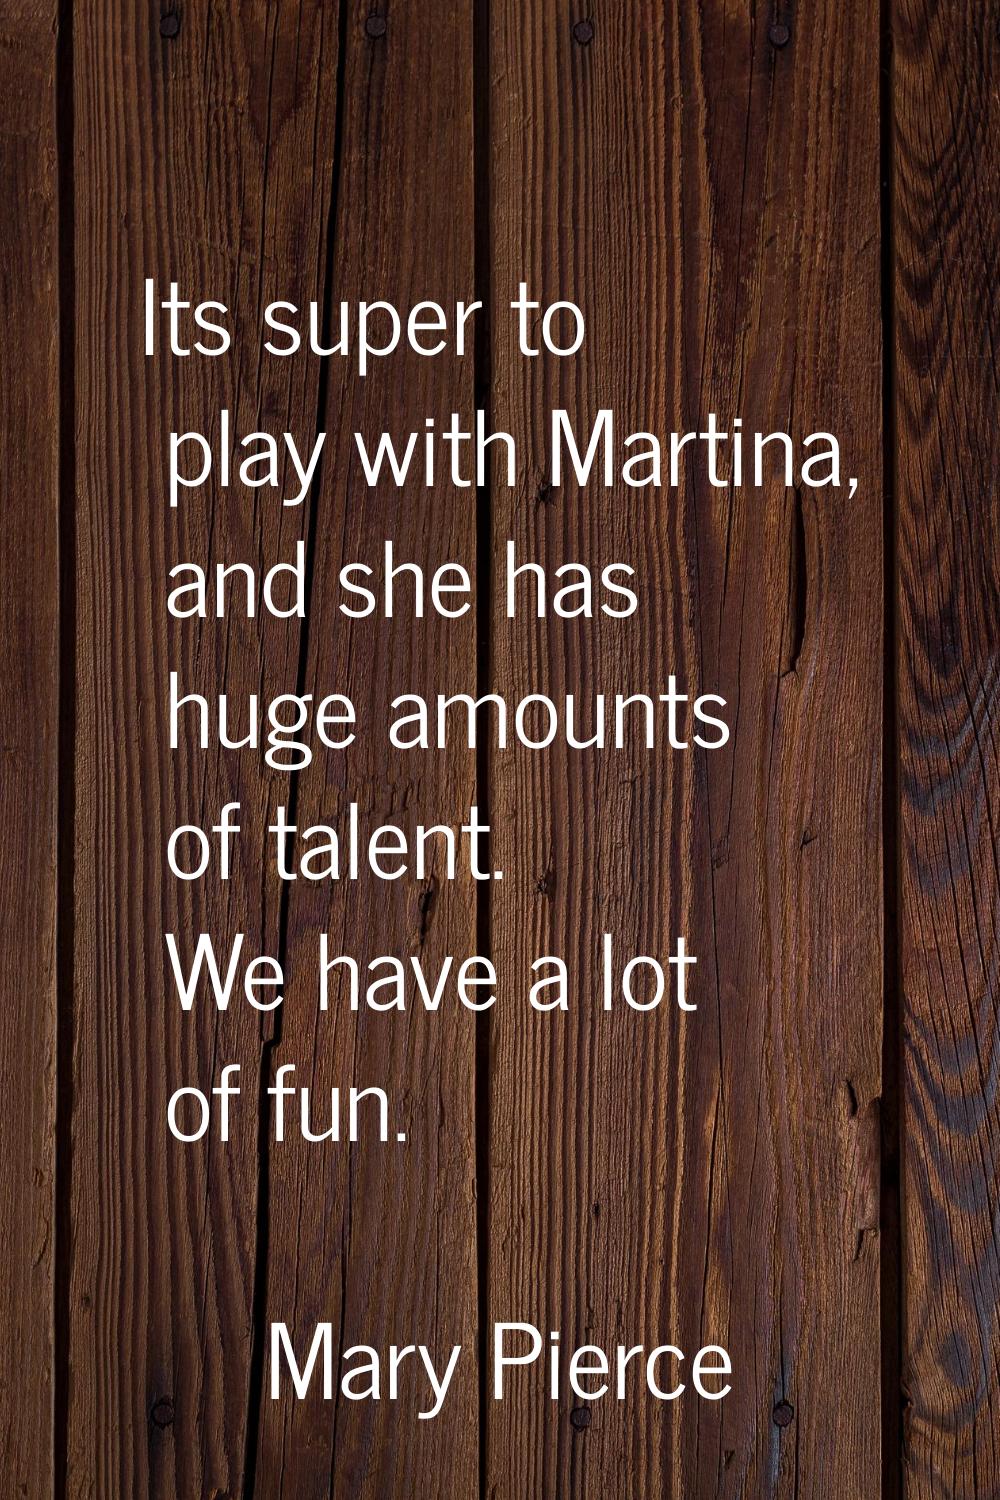 Its super to play with Martina, and she has huge amounts of talent. We have a lot of fun.